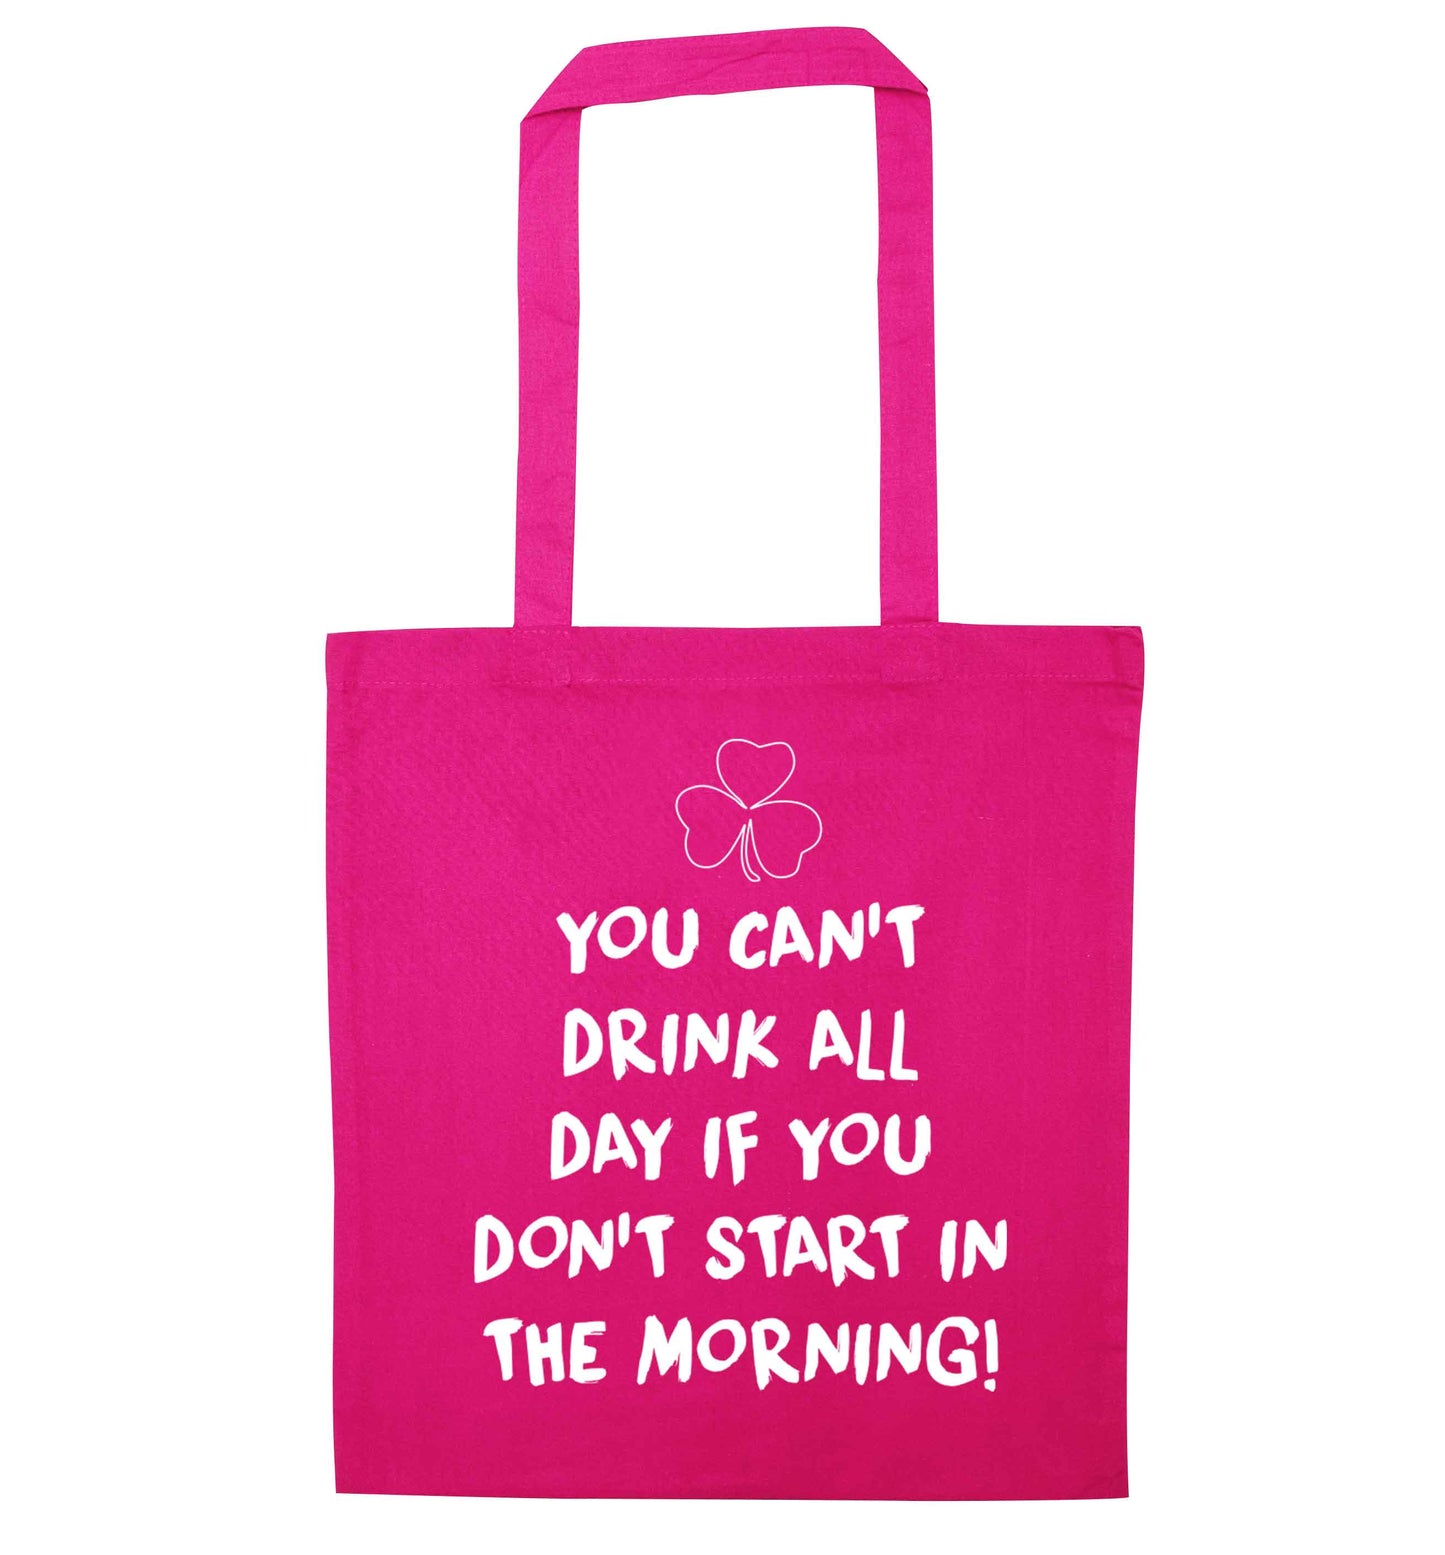 You can't drink all day if you don't start in the morning pink tote bag